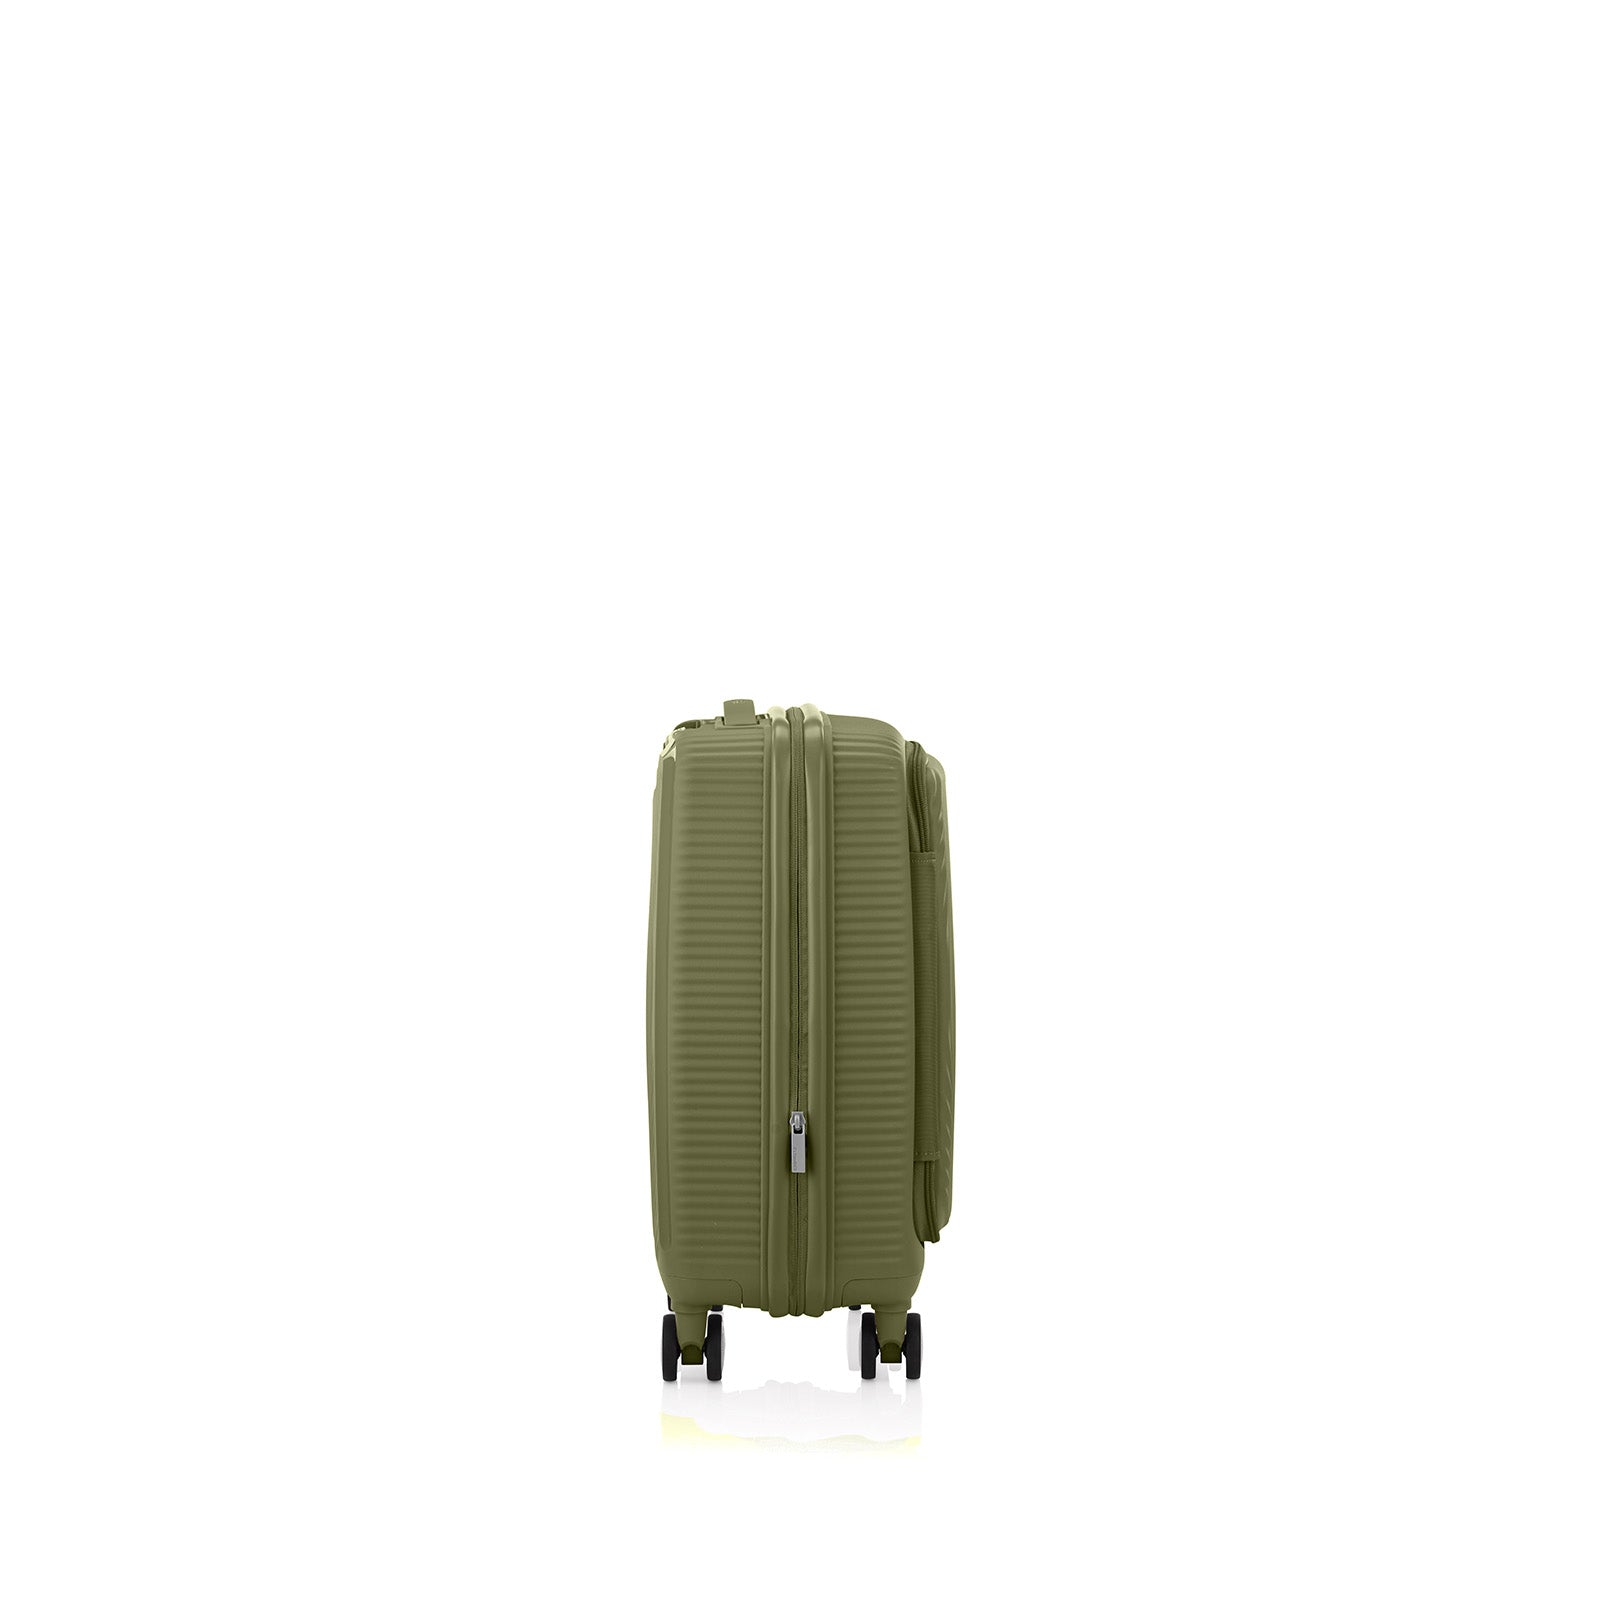 American-Tourister-Curio-Book-Opening-55cm-Carry-On-Suitcase-Khaki-Hinge